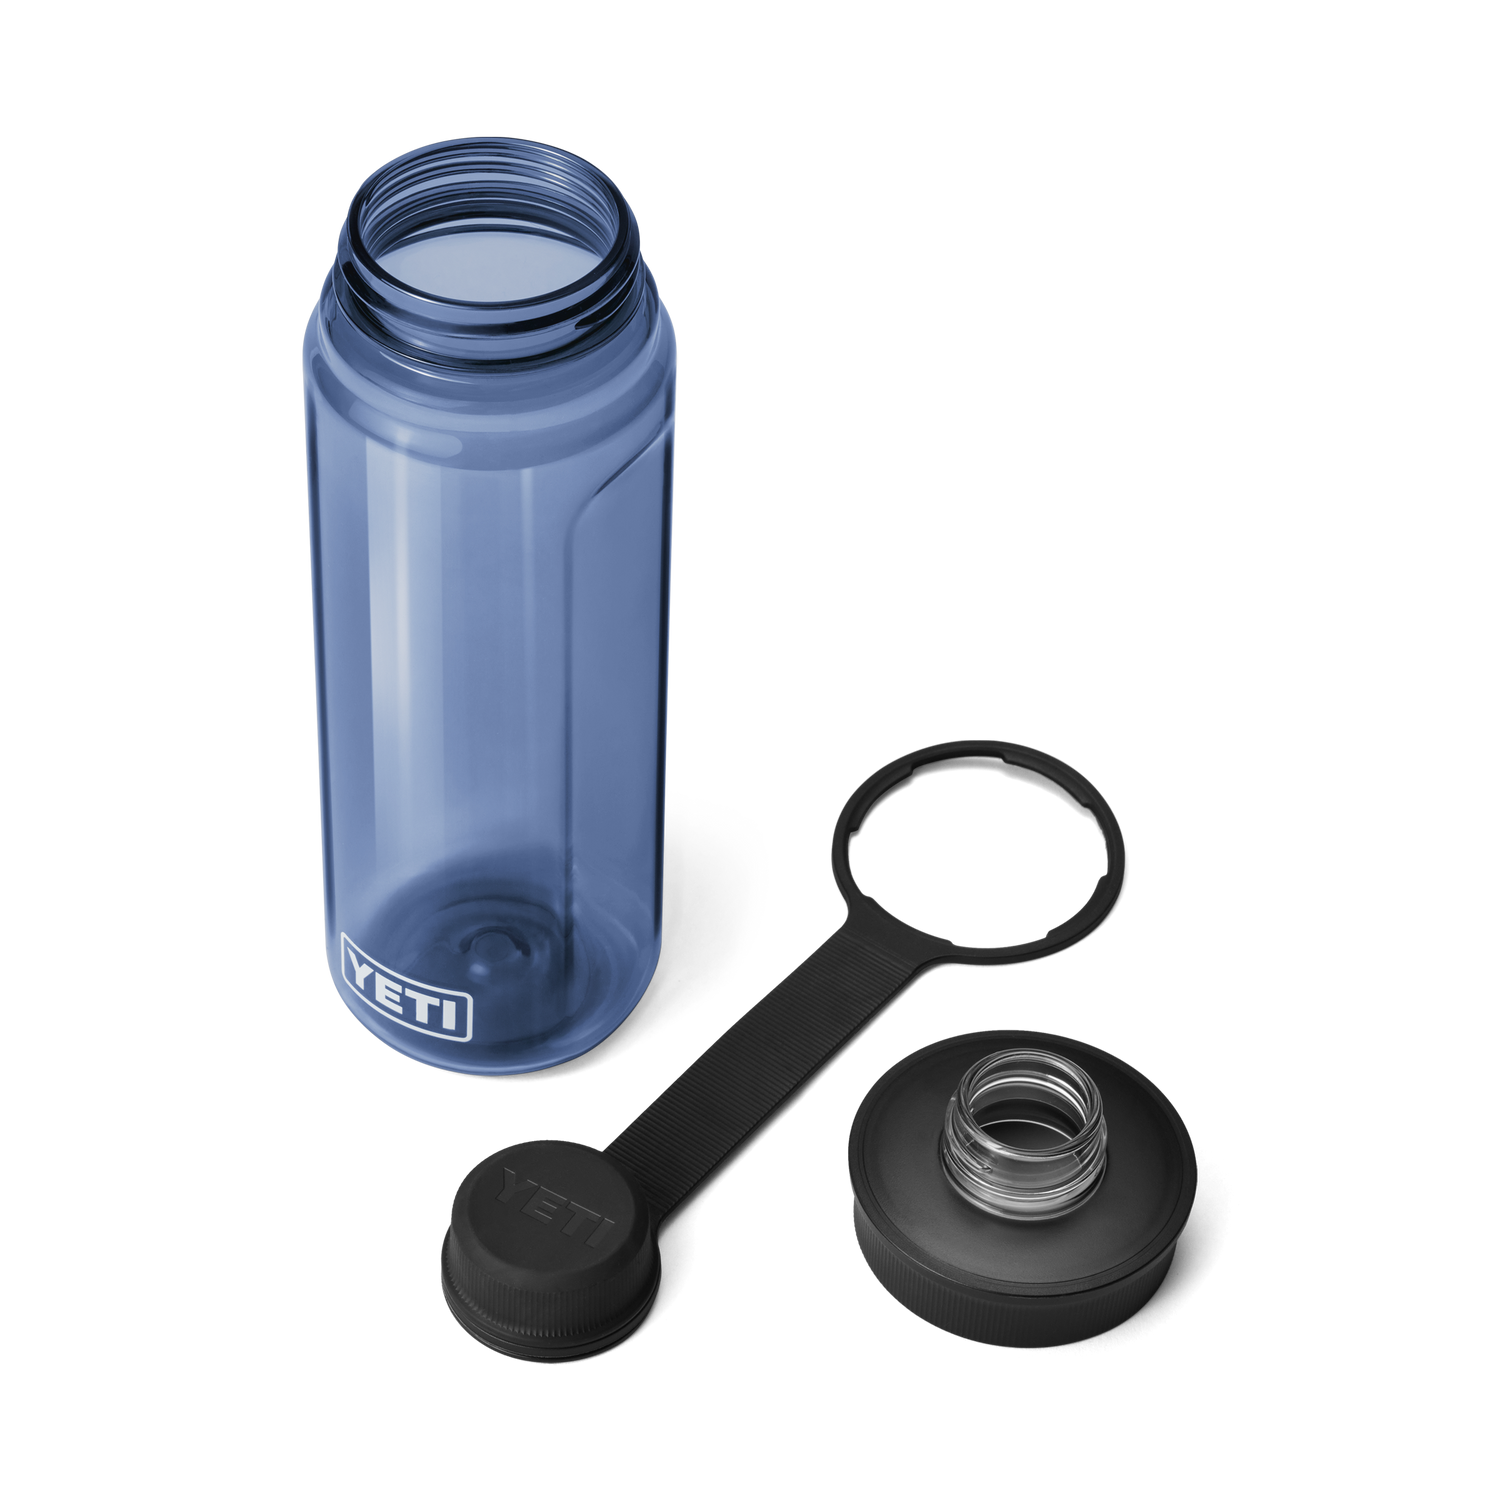 site_studio_Drinkware_Yonder_Tether_Accs_750mL_Navy_3qtr_Chug_Lid_Off_0893_Primary_B_2400x2400.png